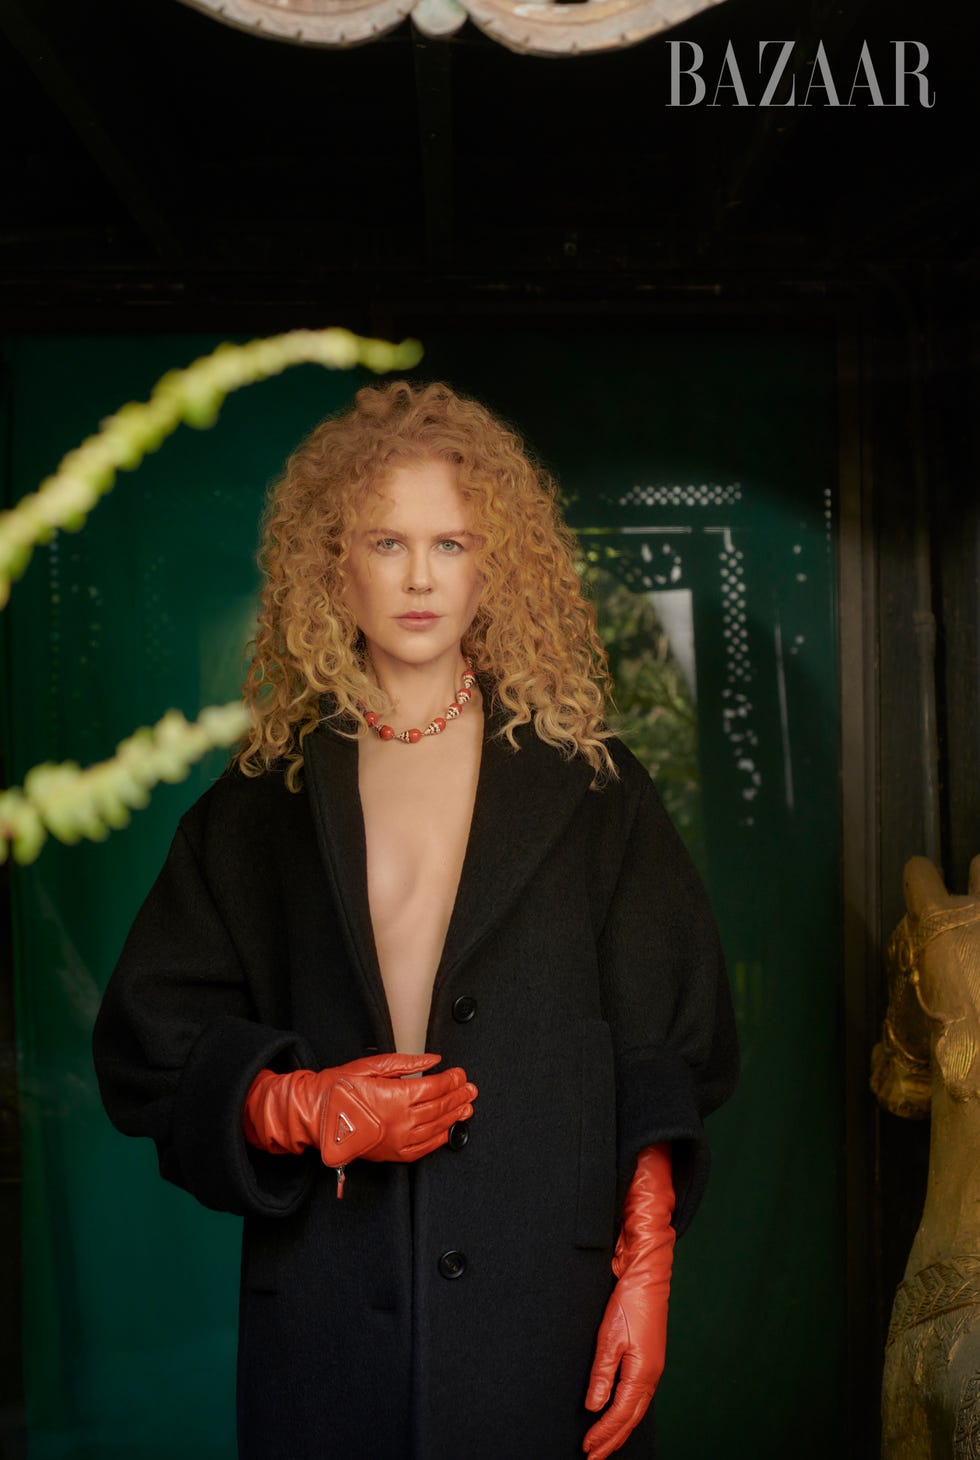 nicole stands in front of a reflective green wall wearing a black undone trench coat and red leather gloves